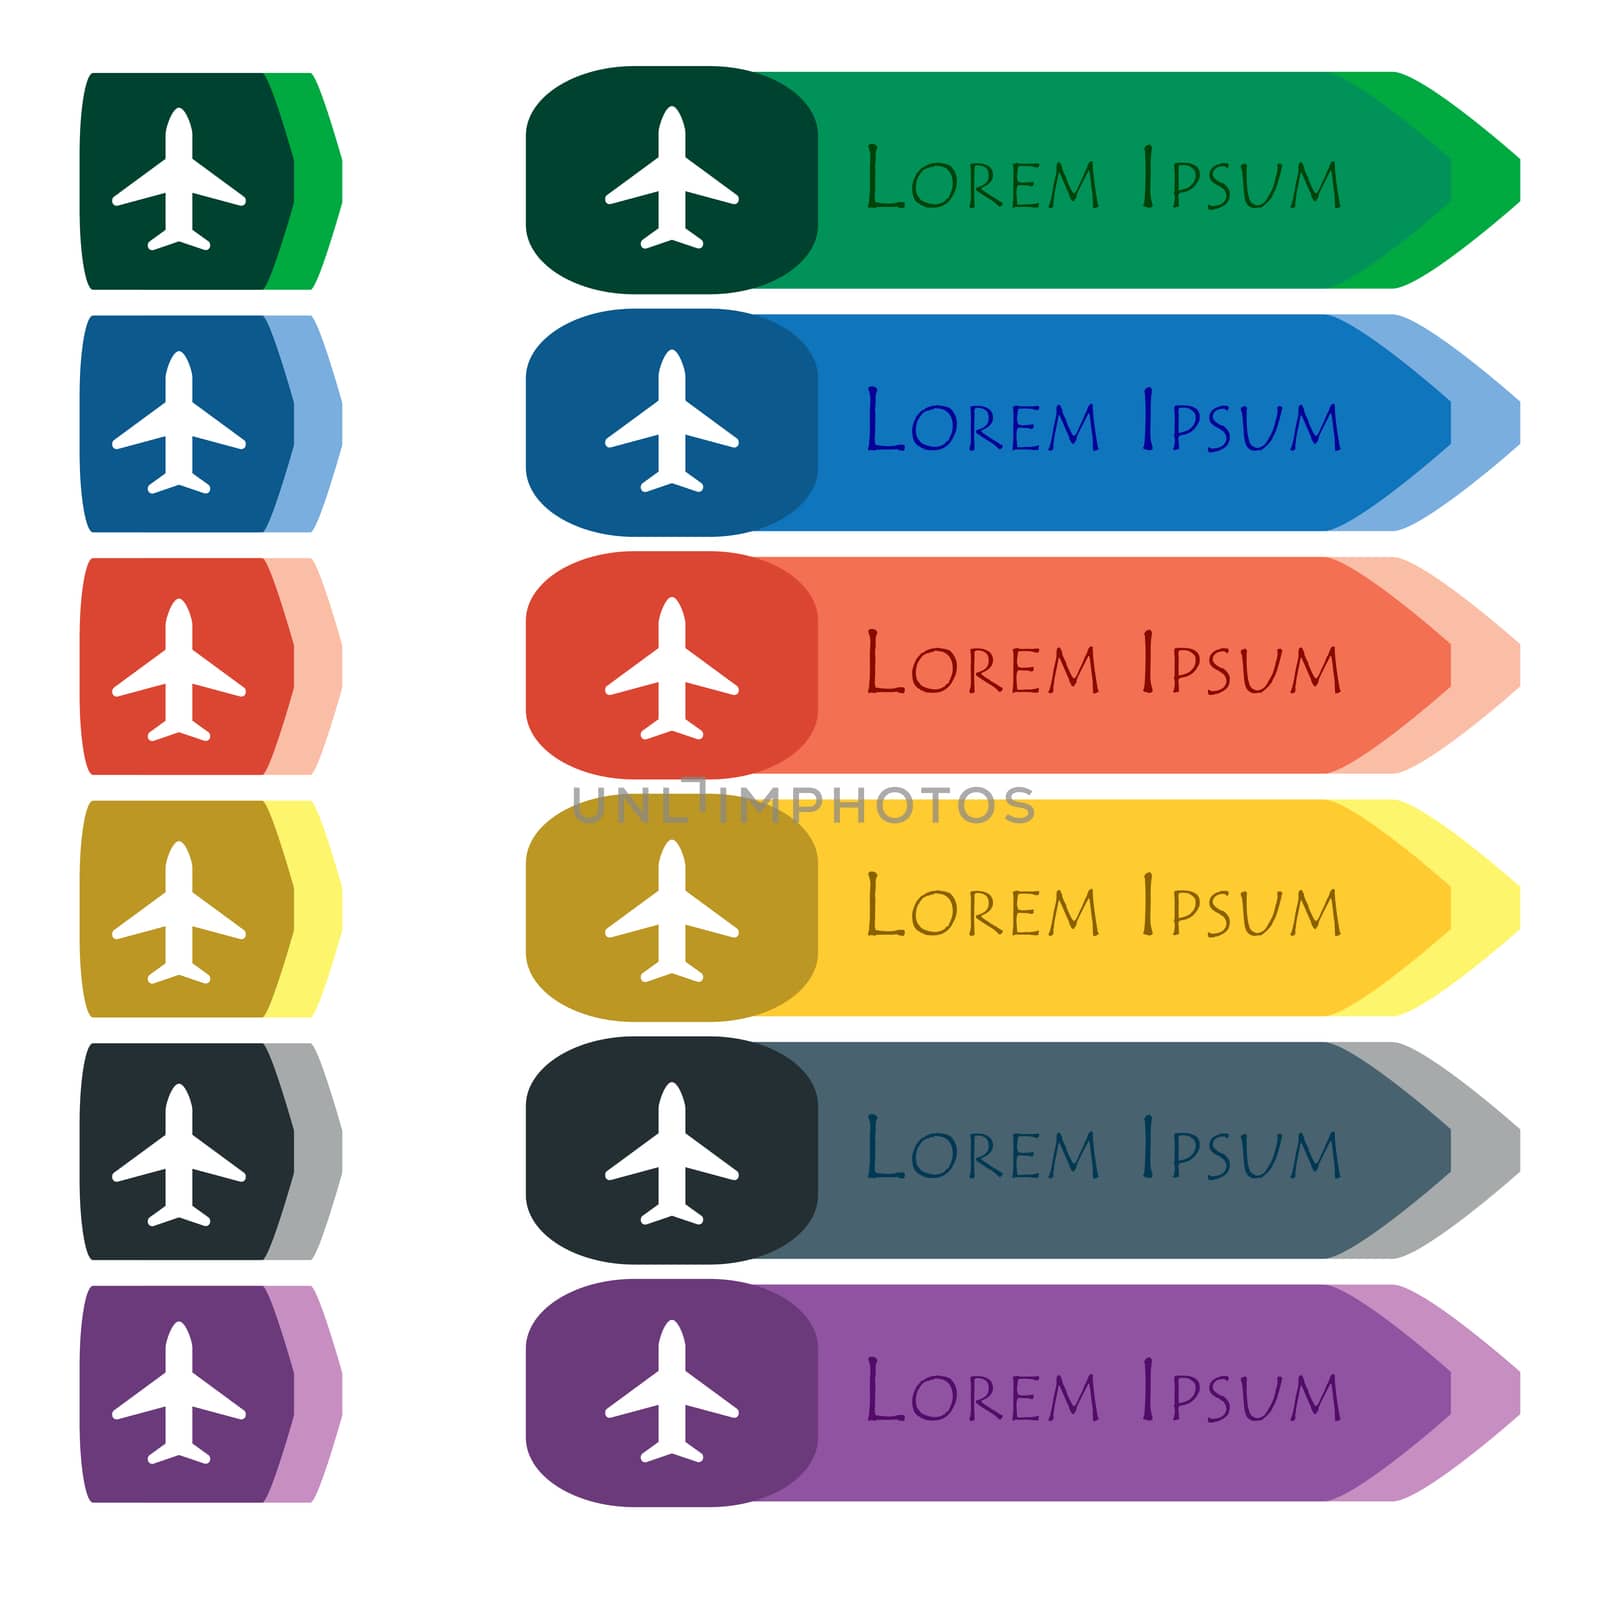 Airplane, Plane, Travel, Flight icon sign. Set of colorful, bright long buttons with additional small modules. Flat design. 